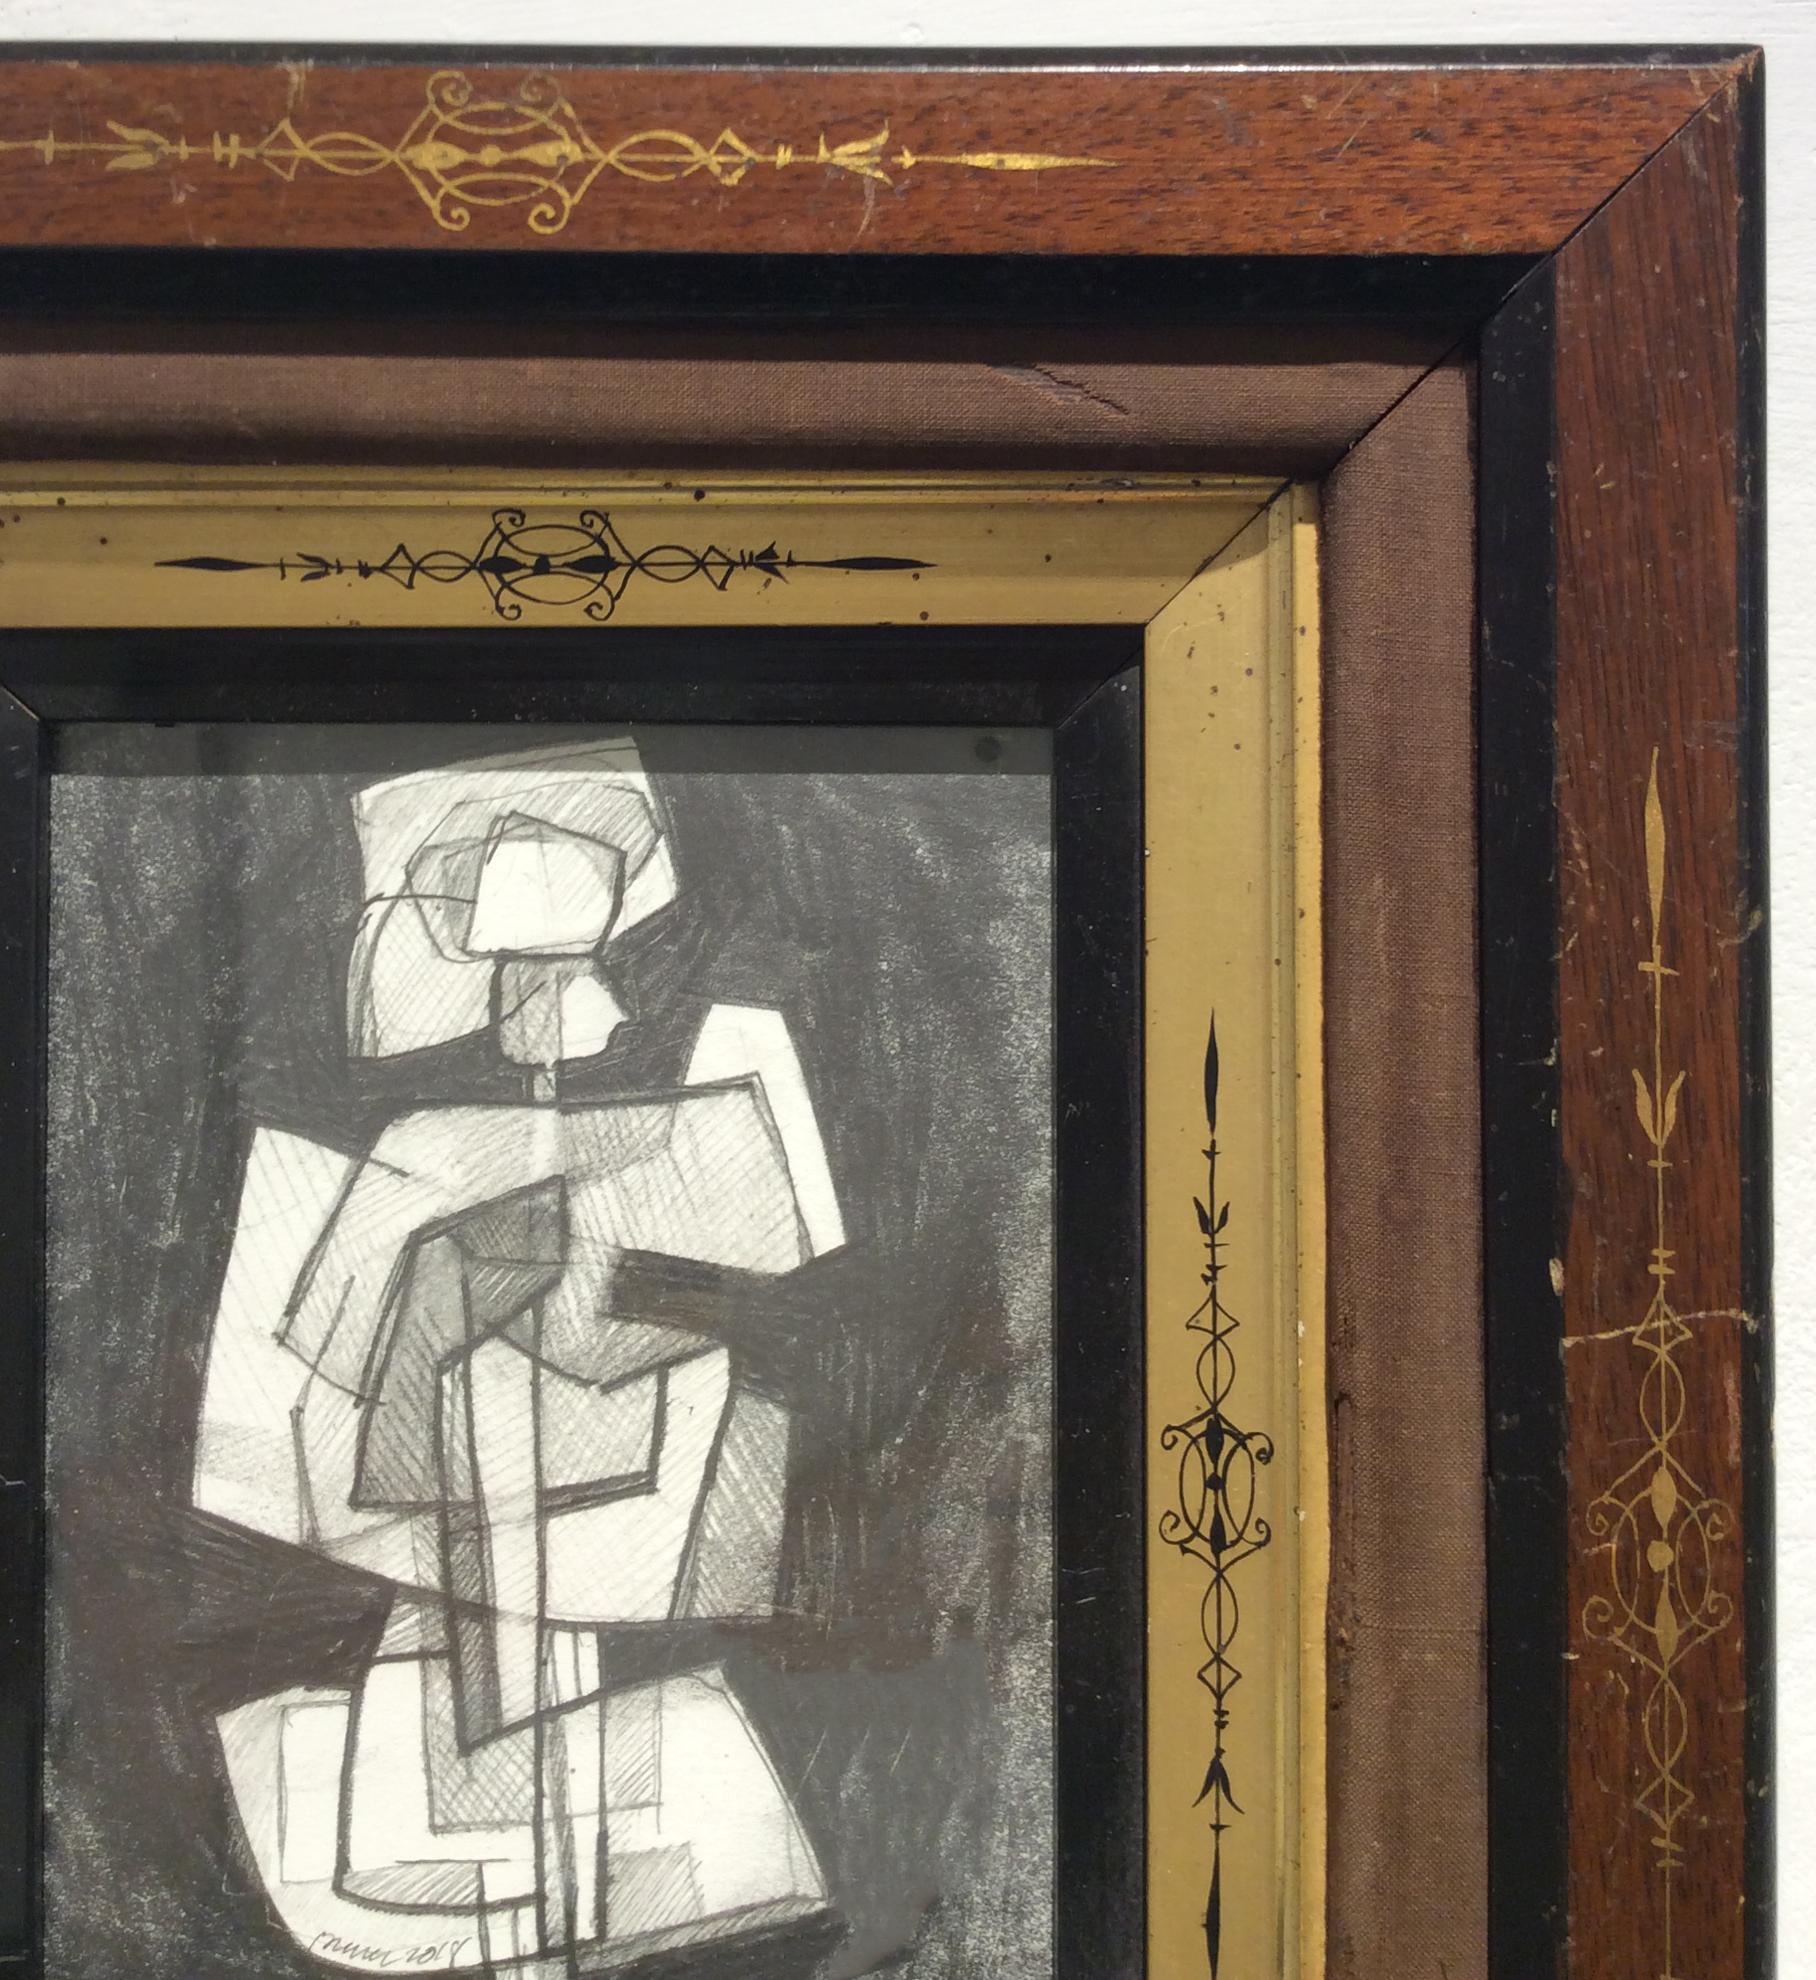 Infanta XLIII (Small Abstract Cubist Graphite Drawing in Vintage Eastlake Frame) - Contemporary Art by David Dew Bruner